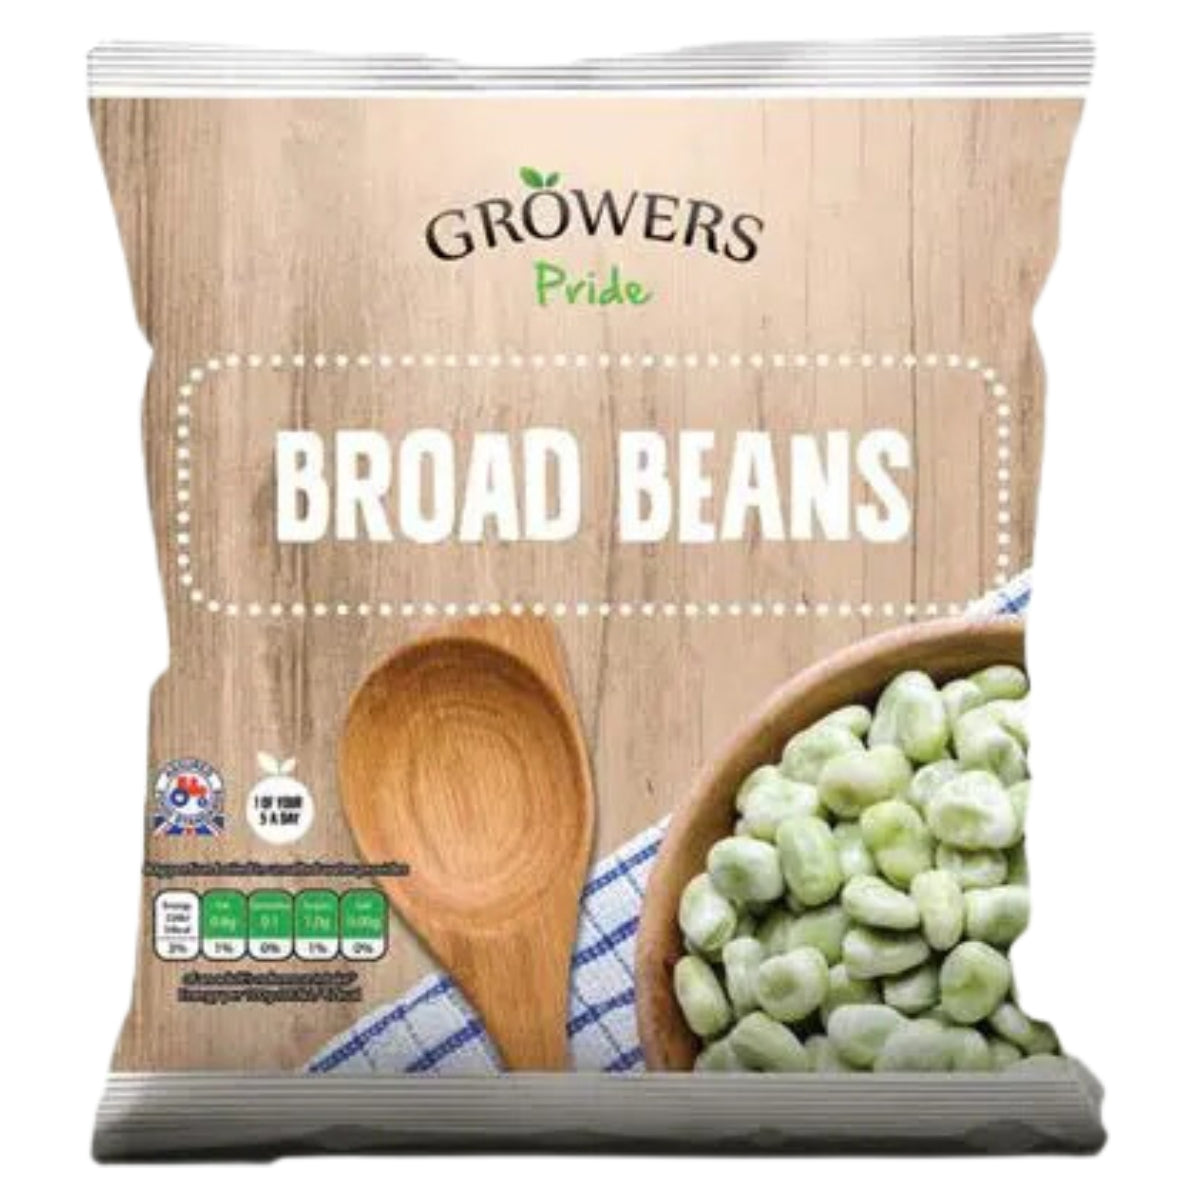 A bag of Growers Pride - Broad Beans - 450g on a white background.